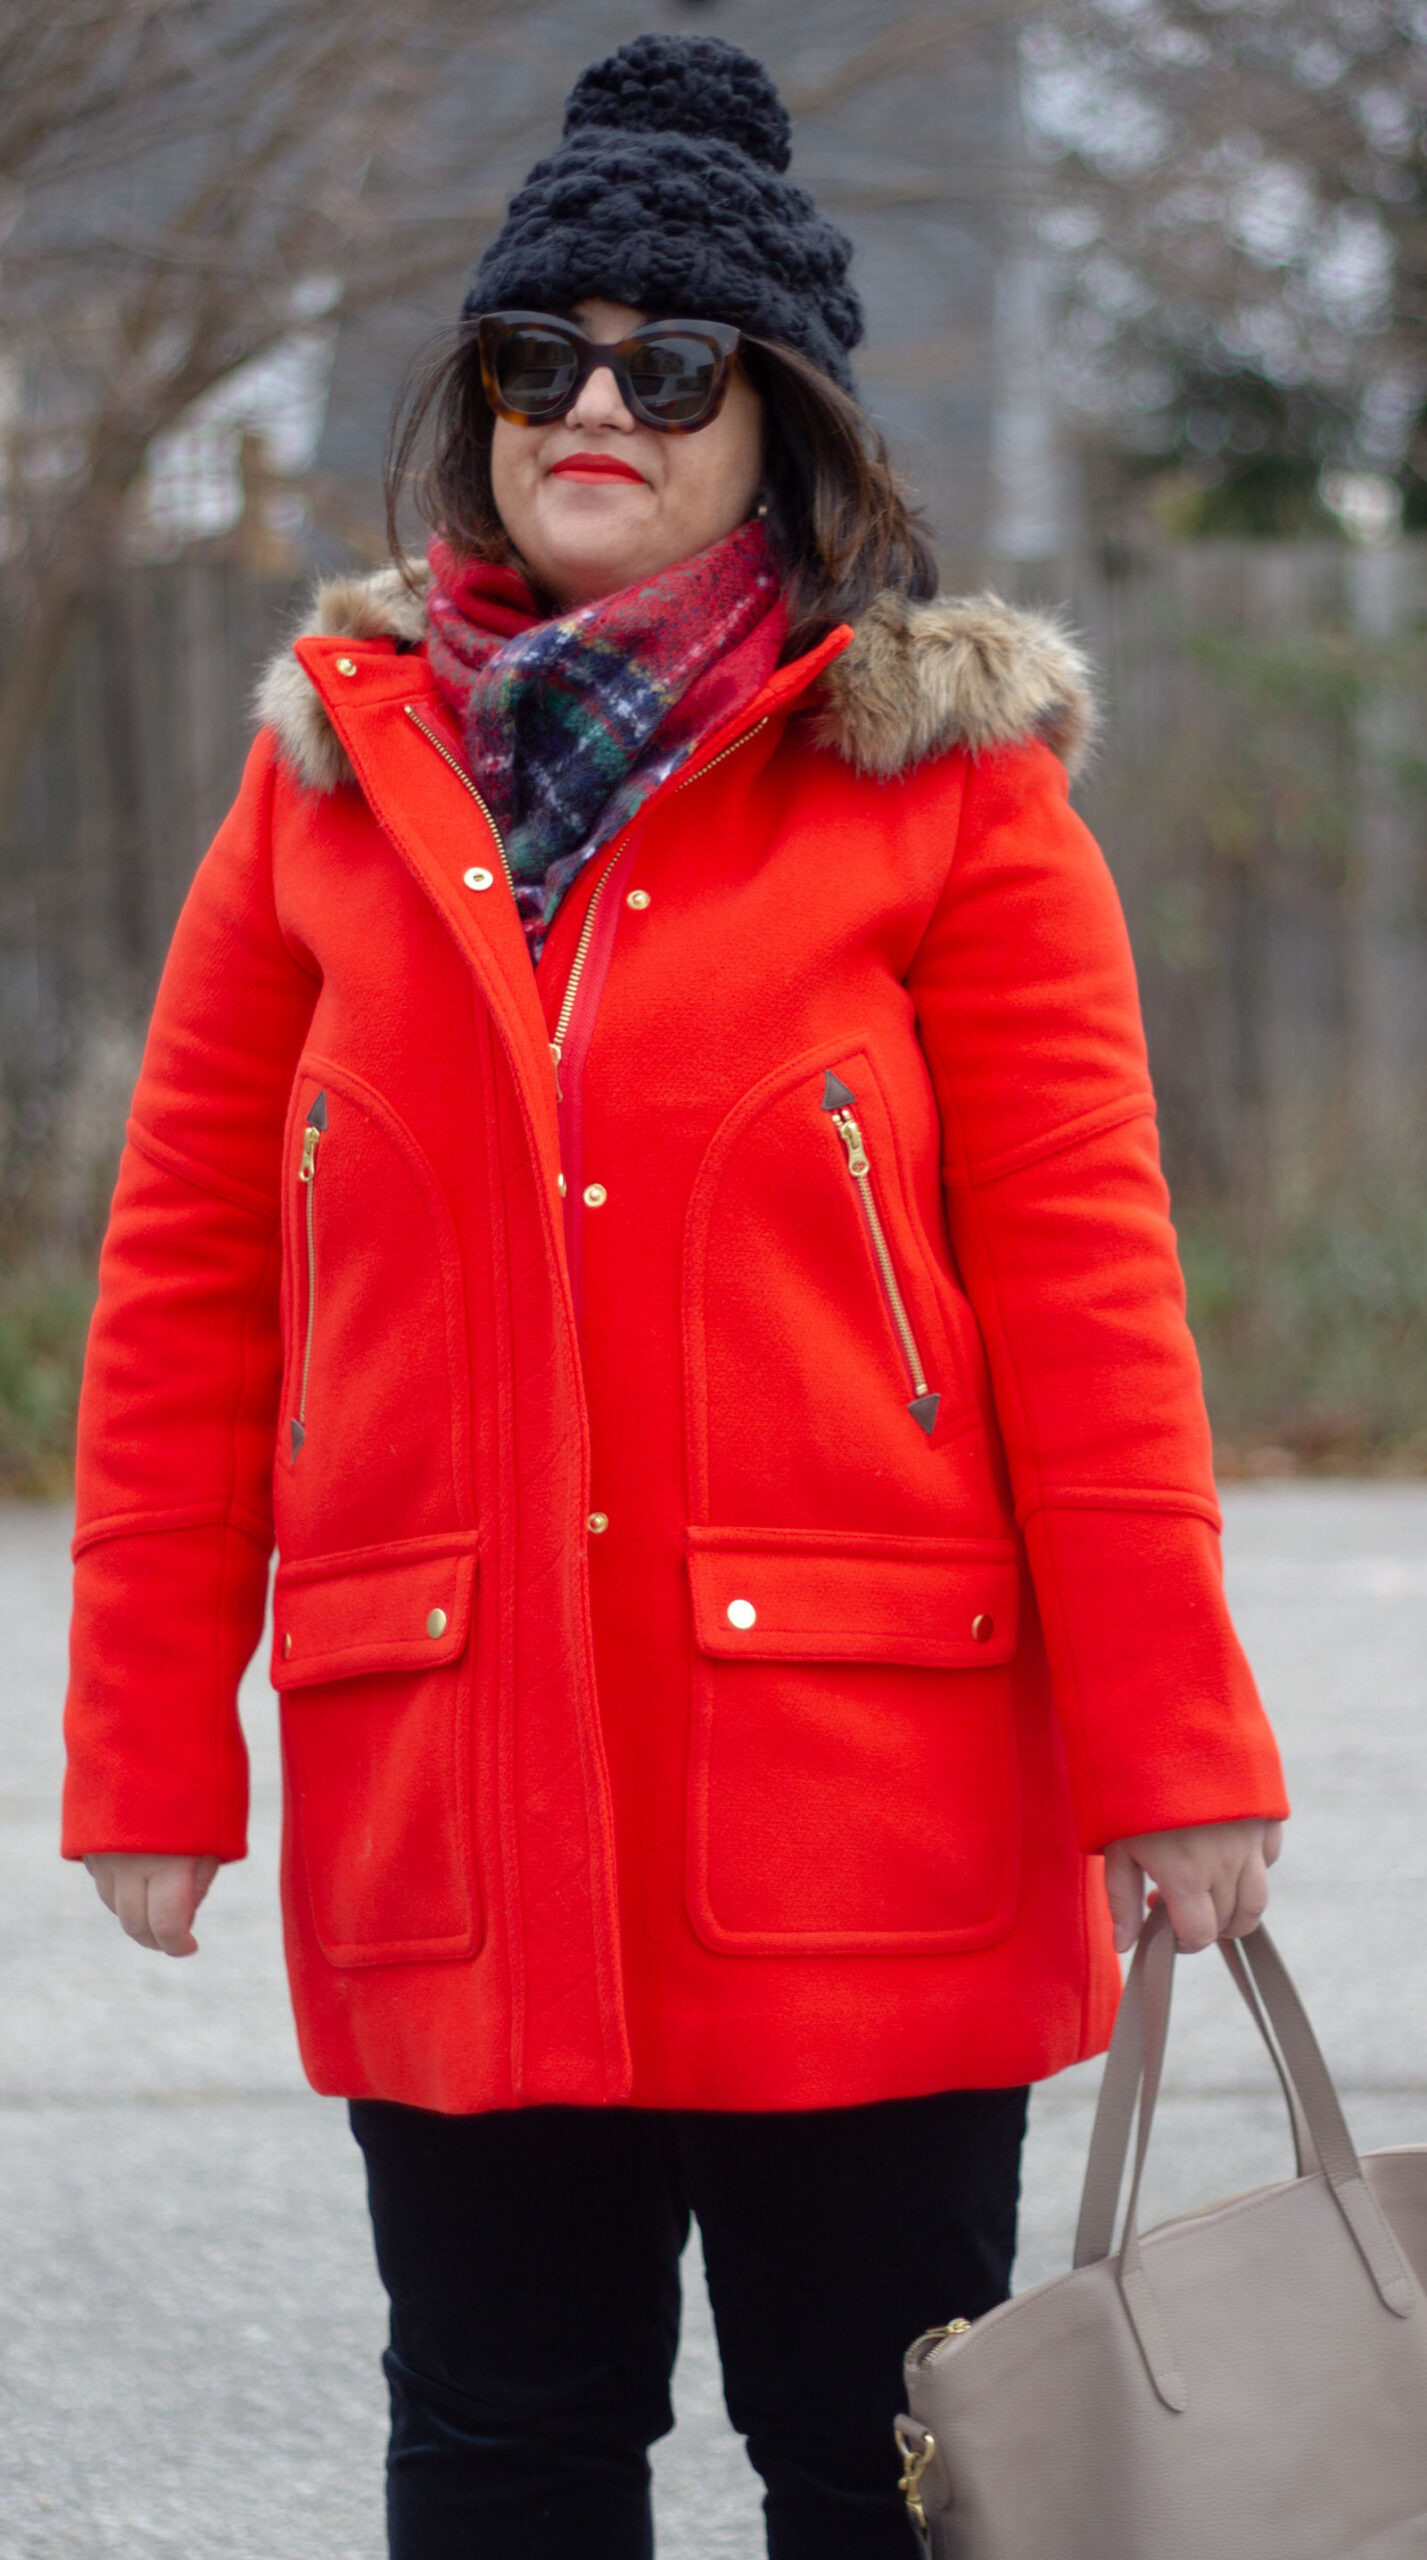 jcrew chateau parka in red